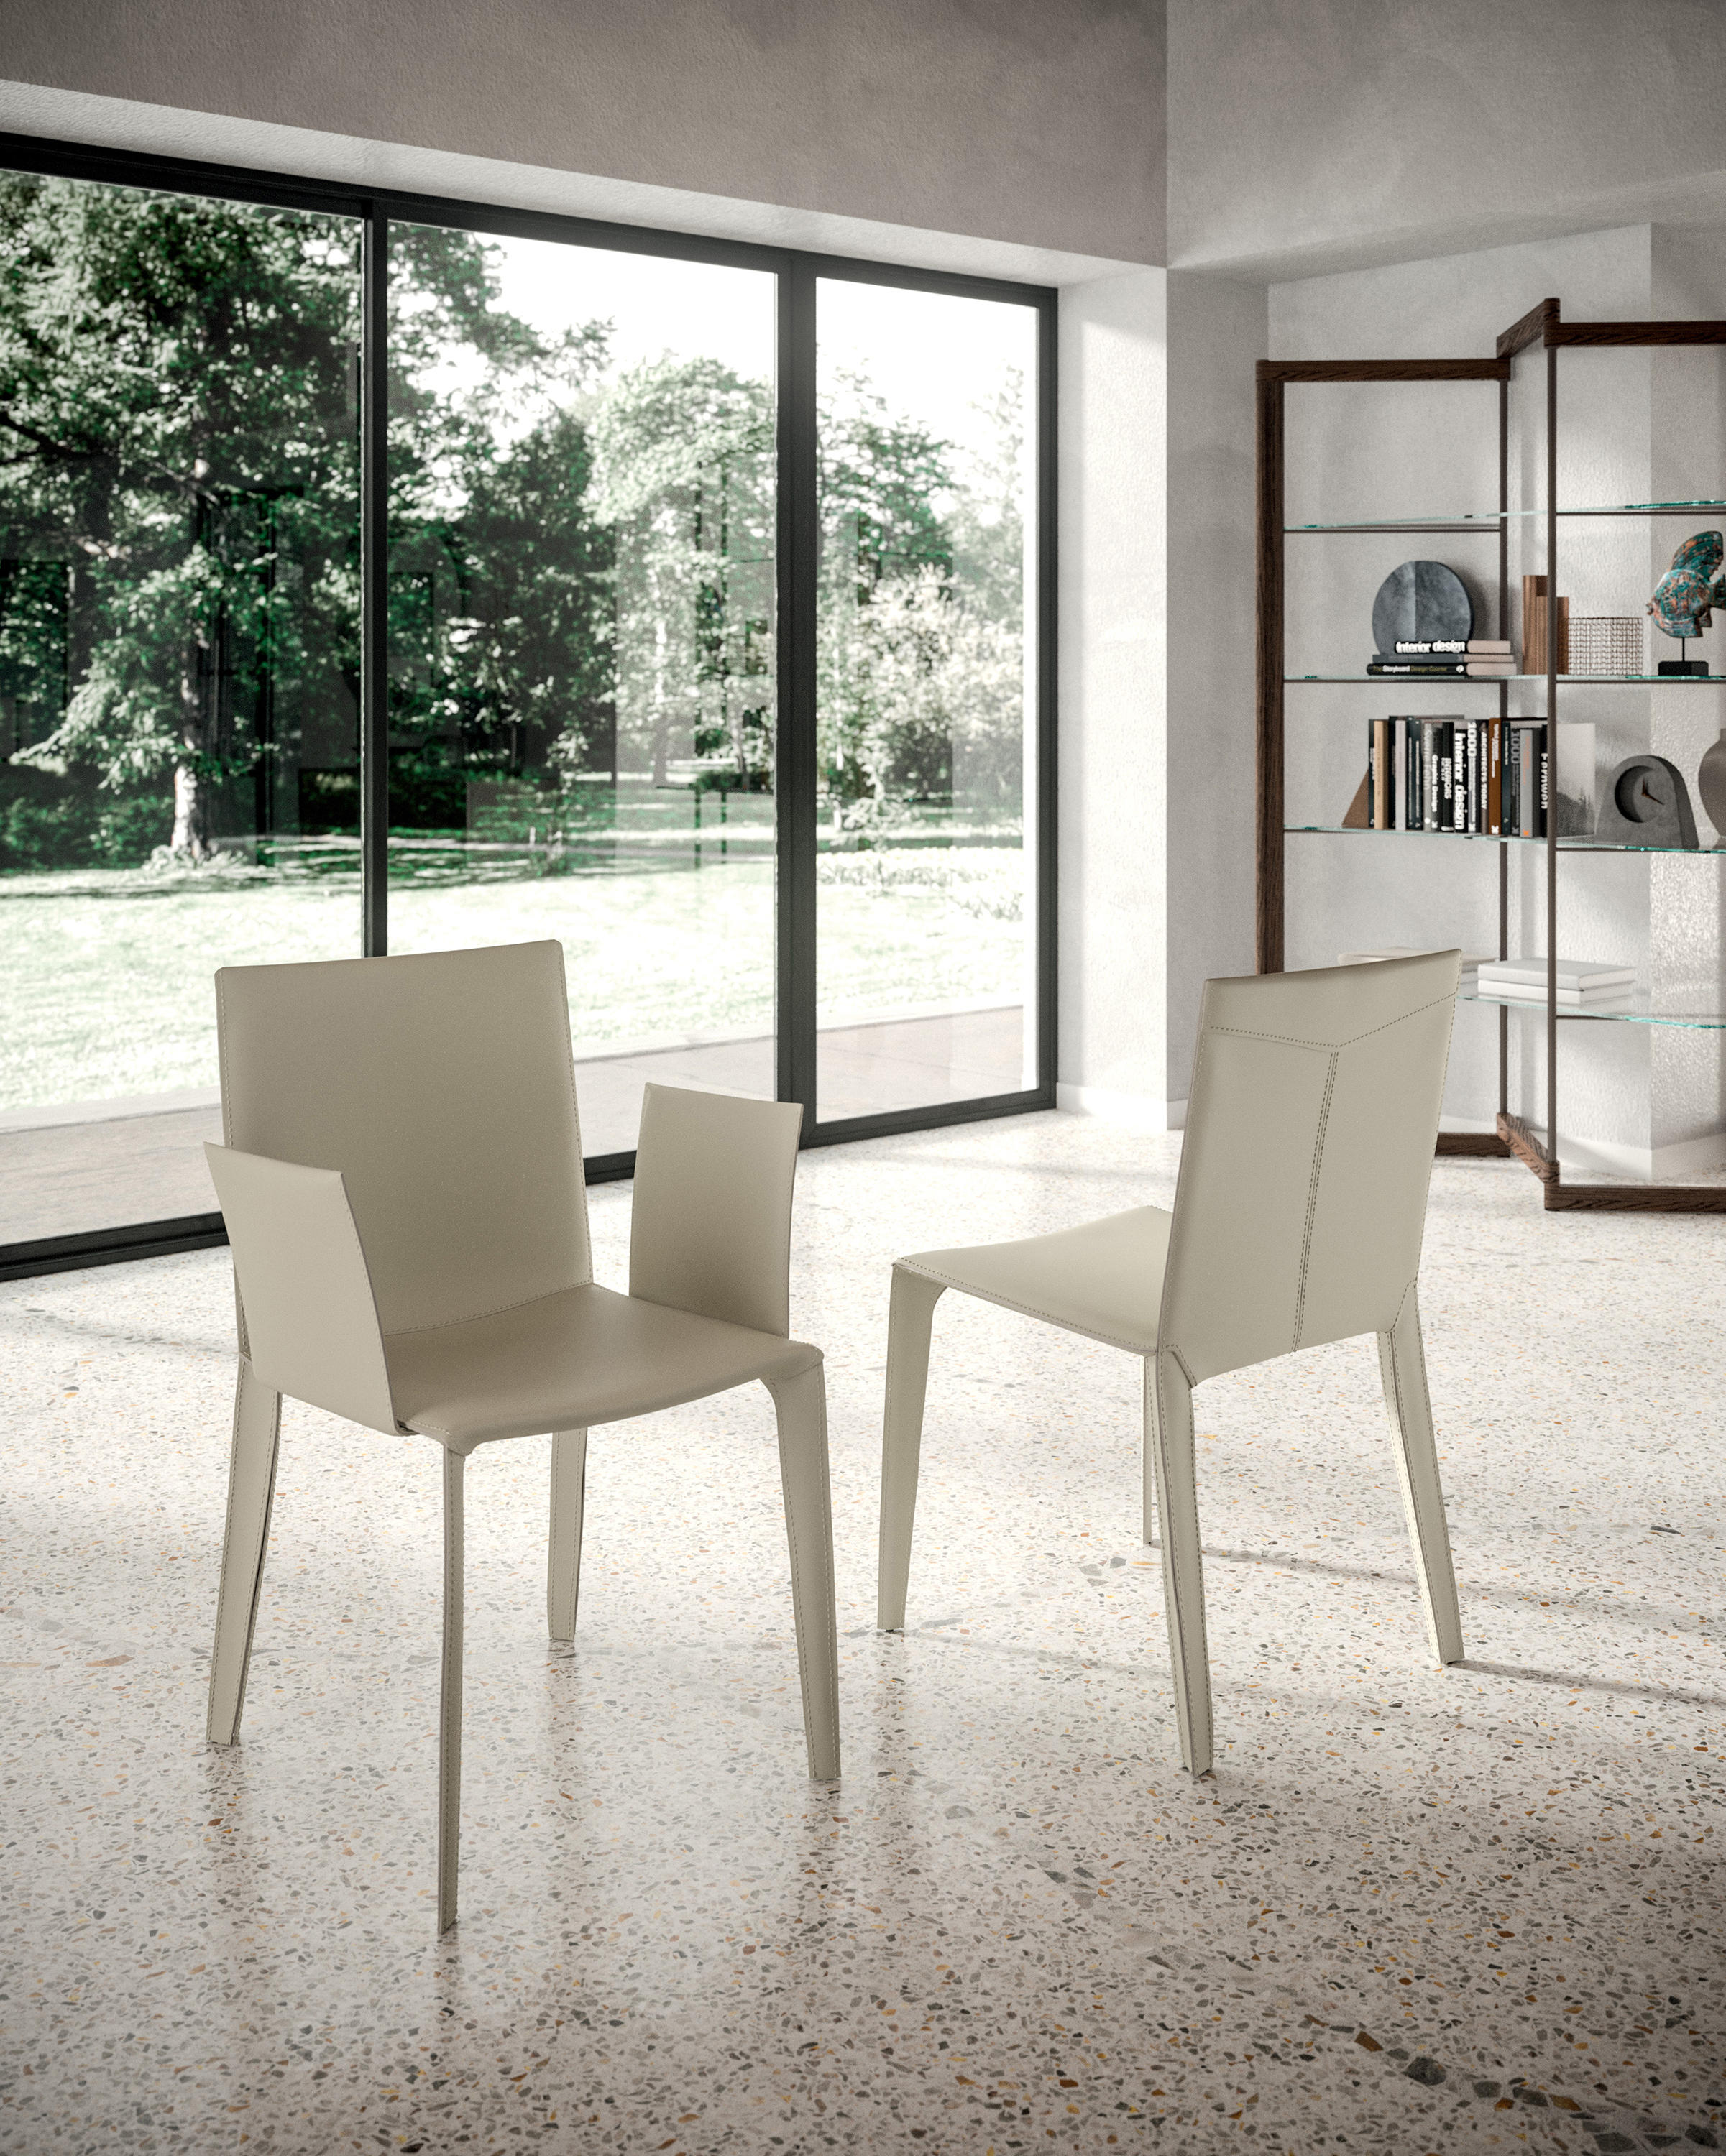 FRISBEE - Chairs from OZZIO ITALIA | Architonic